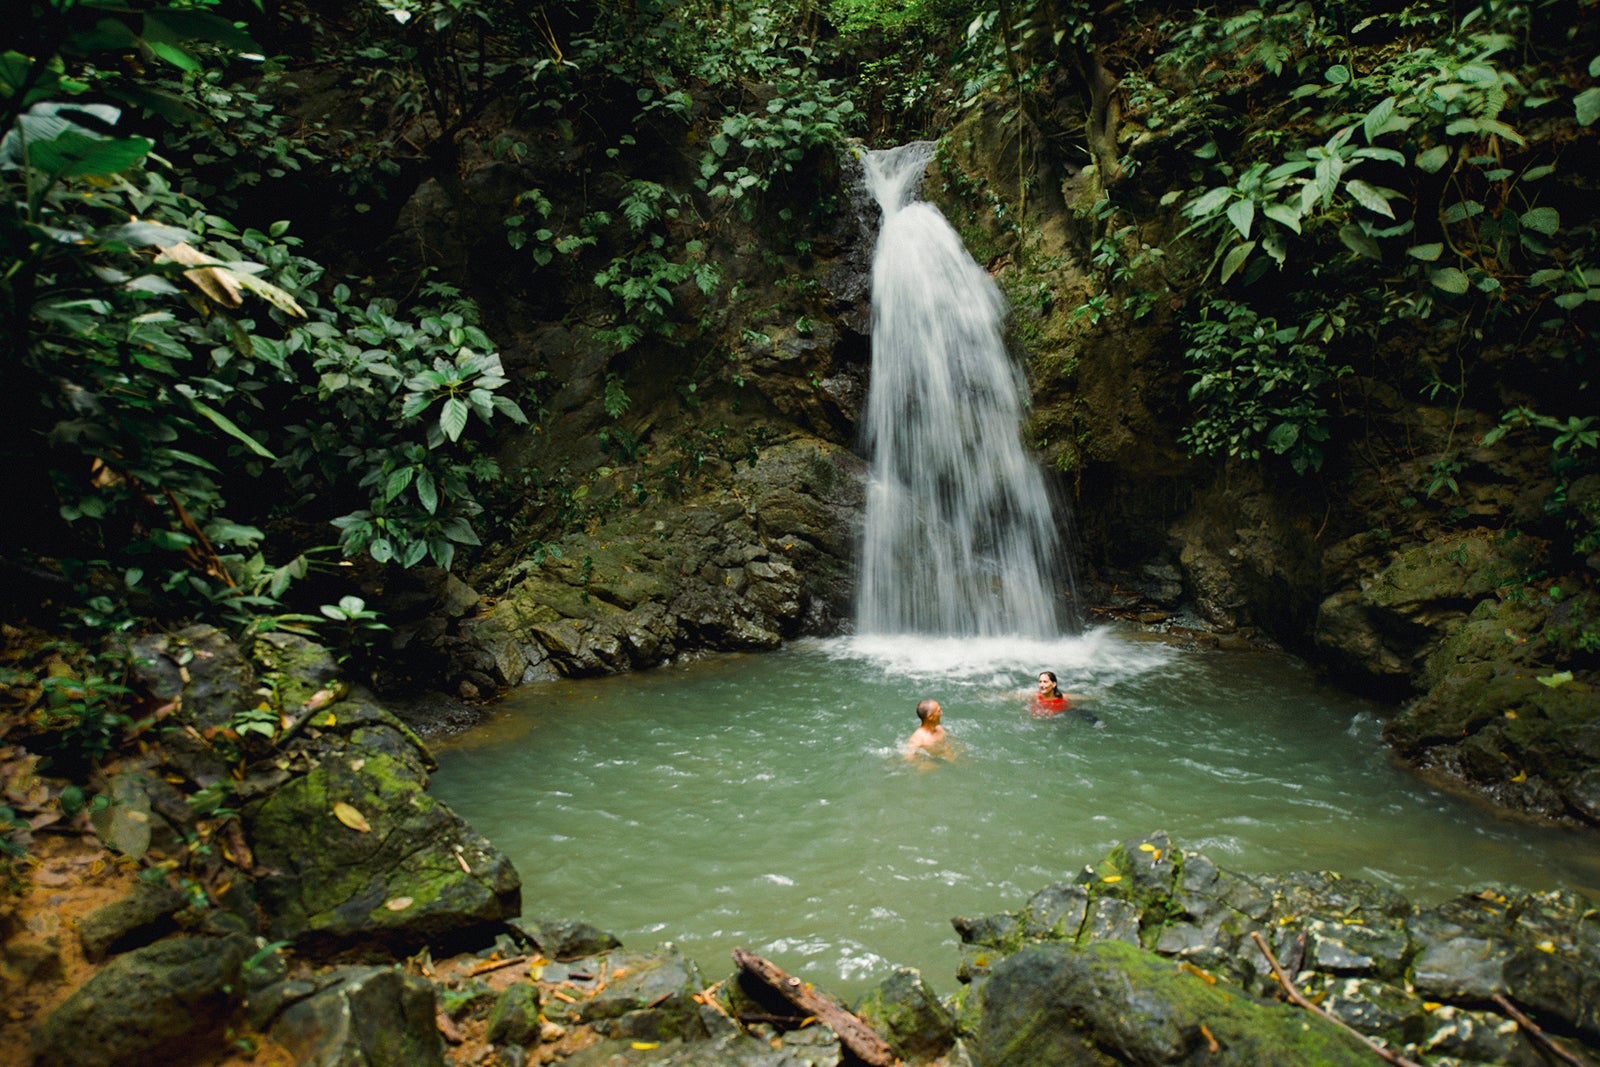 Rainforest waterfall in the Osa Penisula of Costa Rica